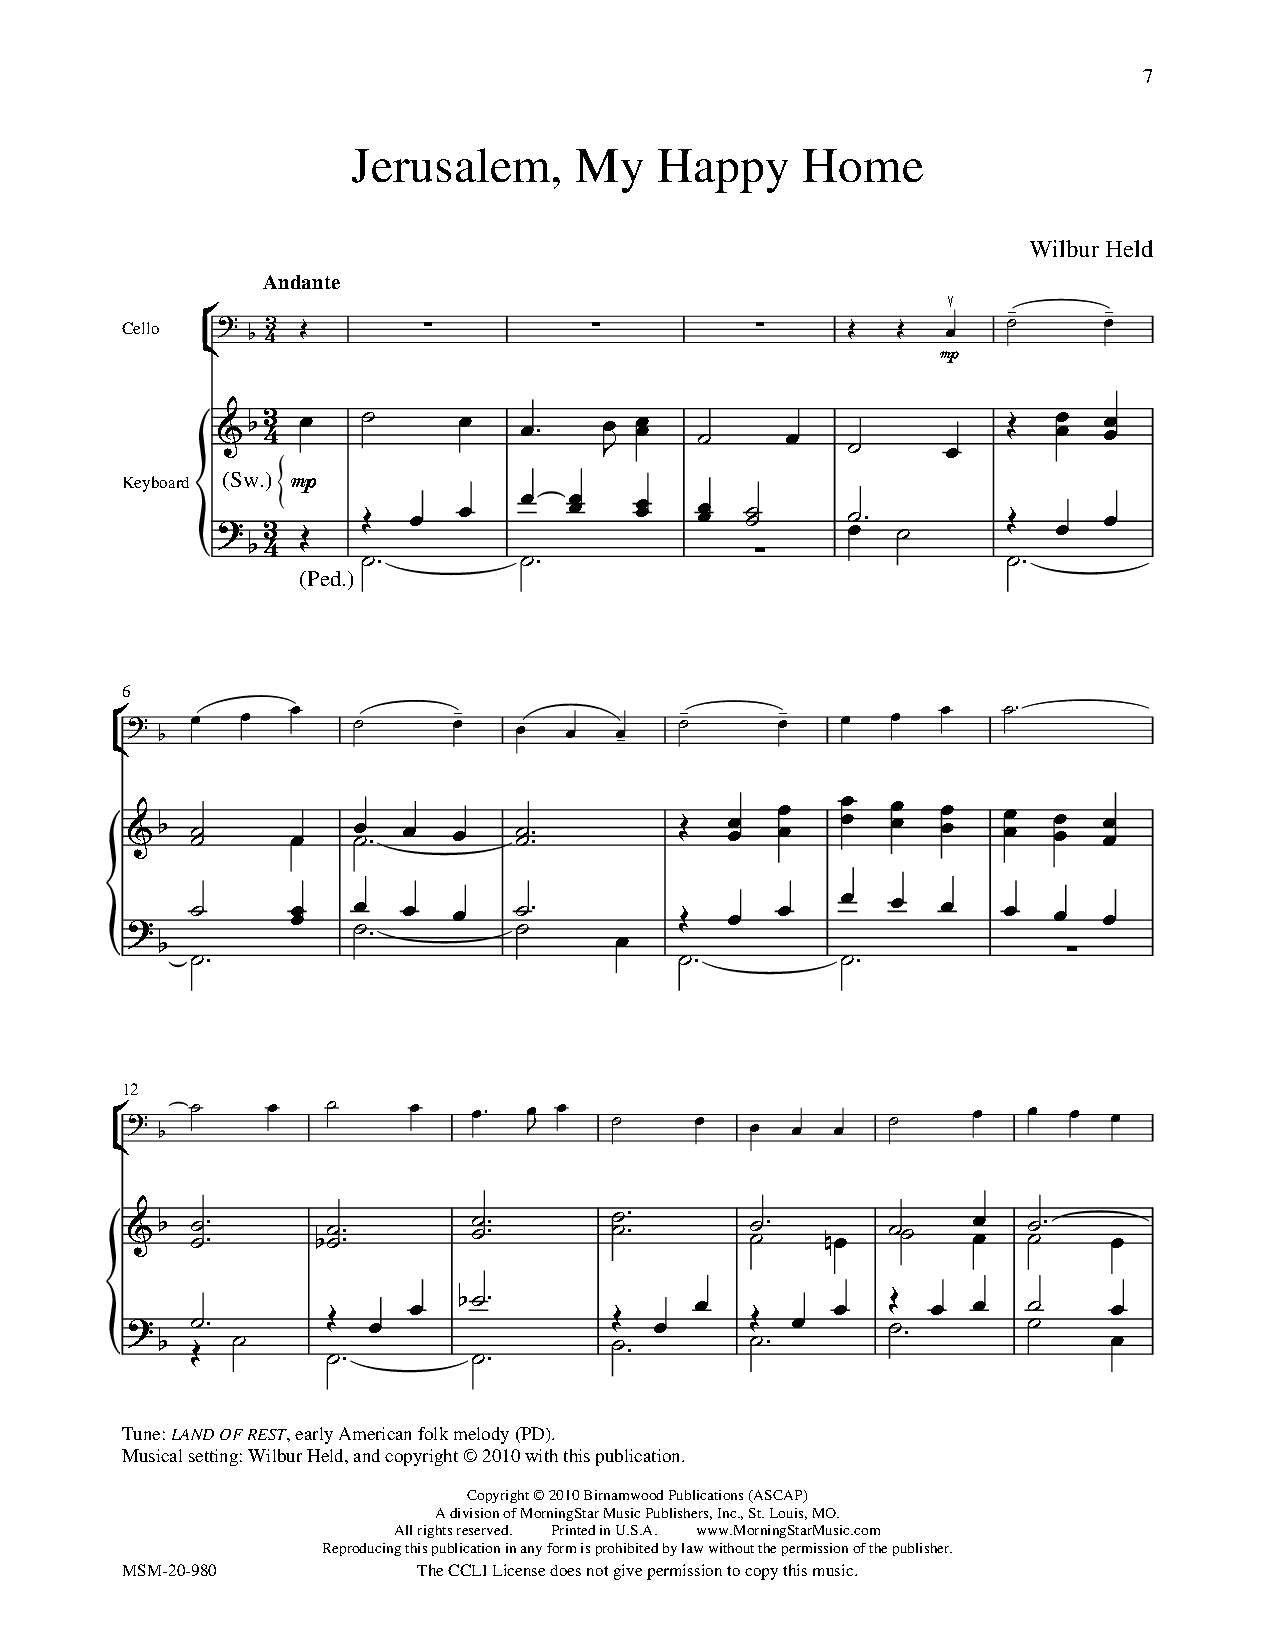 FIVE HYMN PRELUDES FOR CELLO AND KEYBOARD